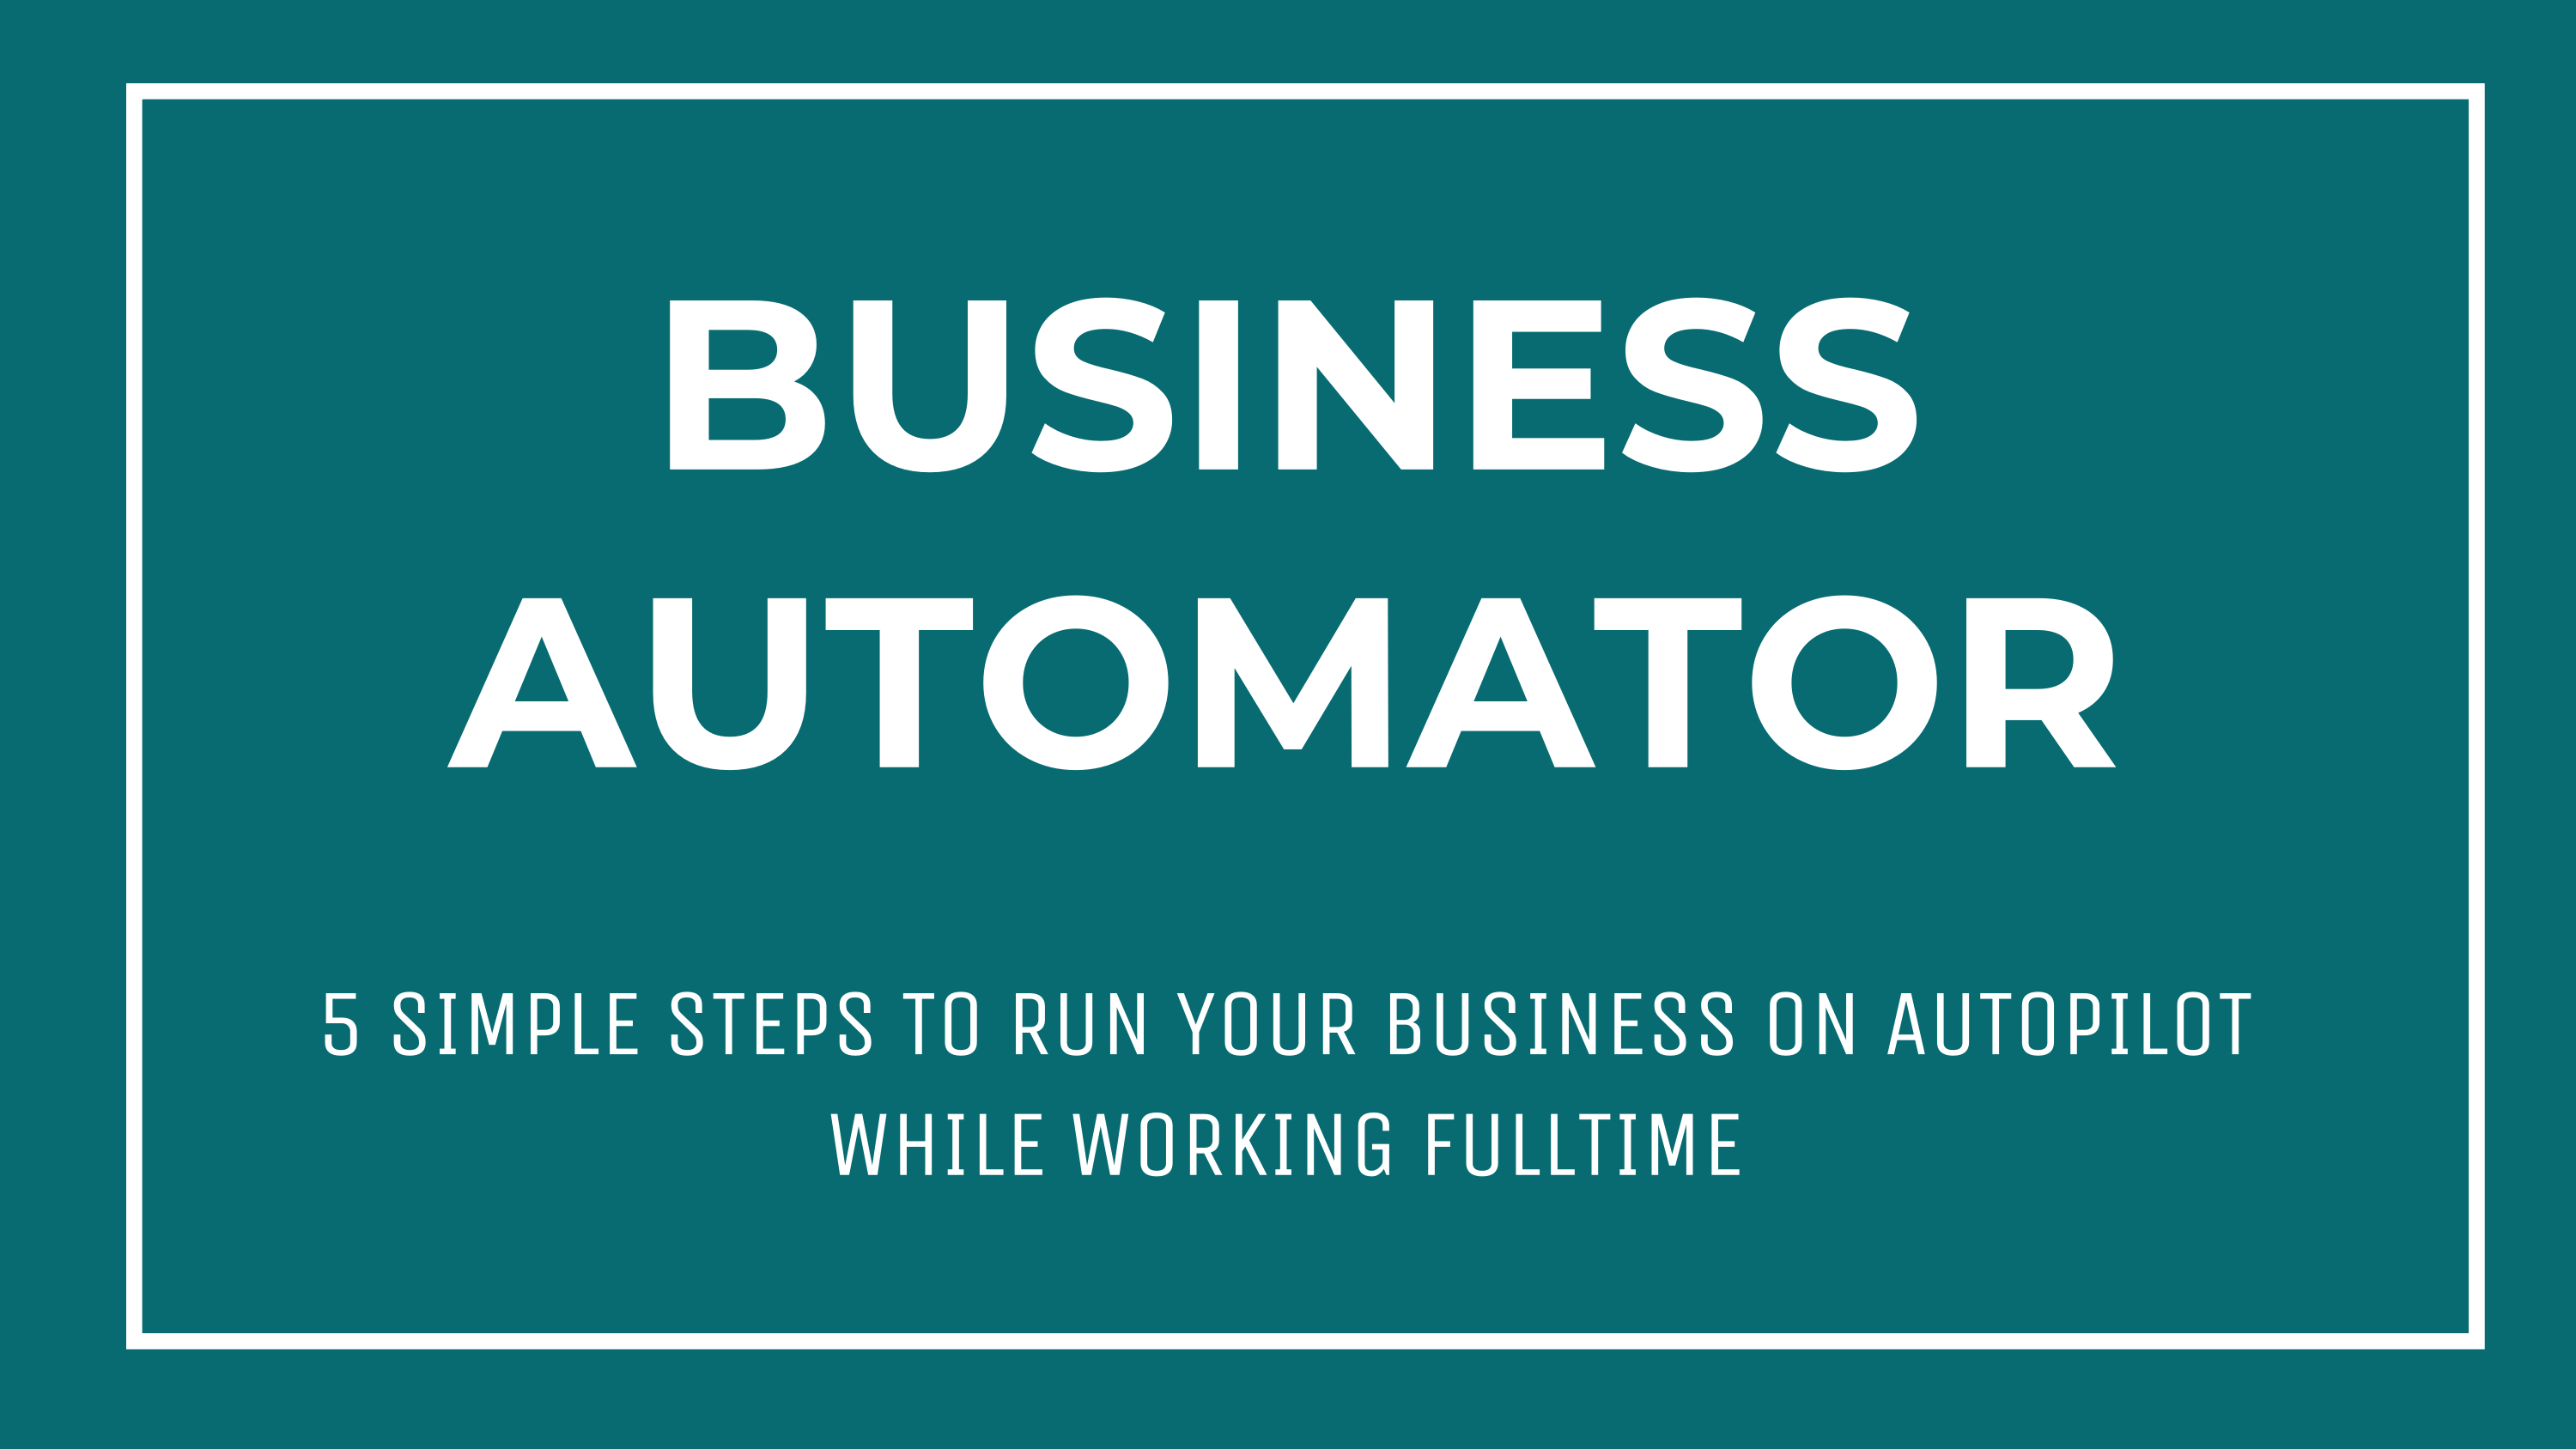 BUSINESS AUTOMATION USE